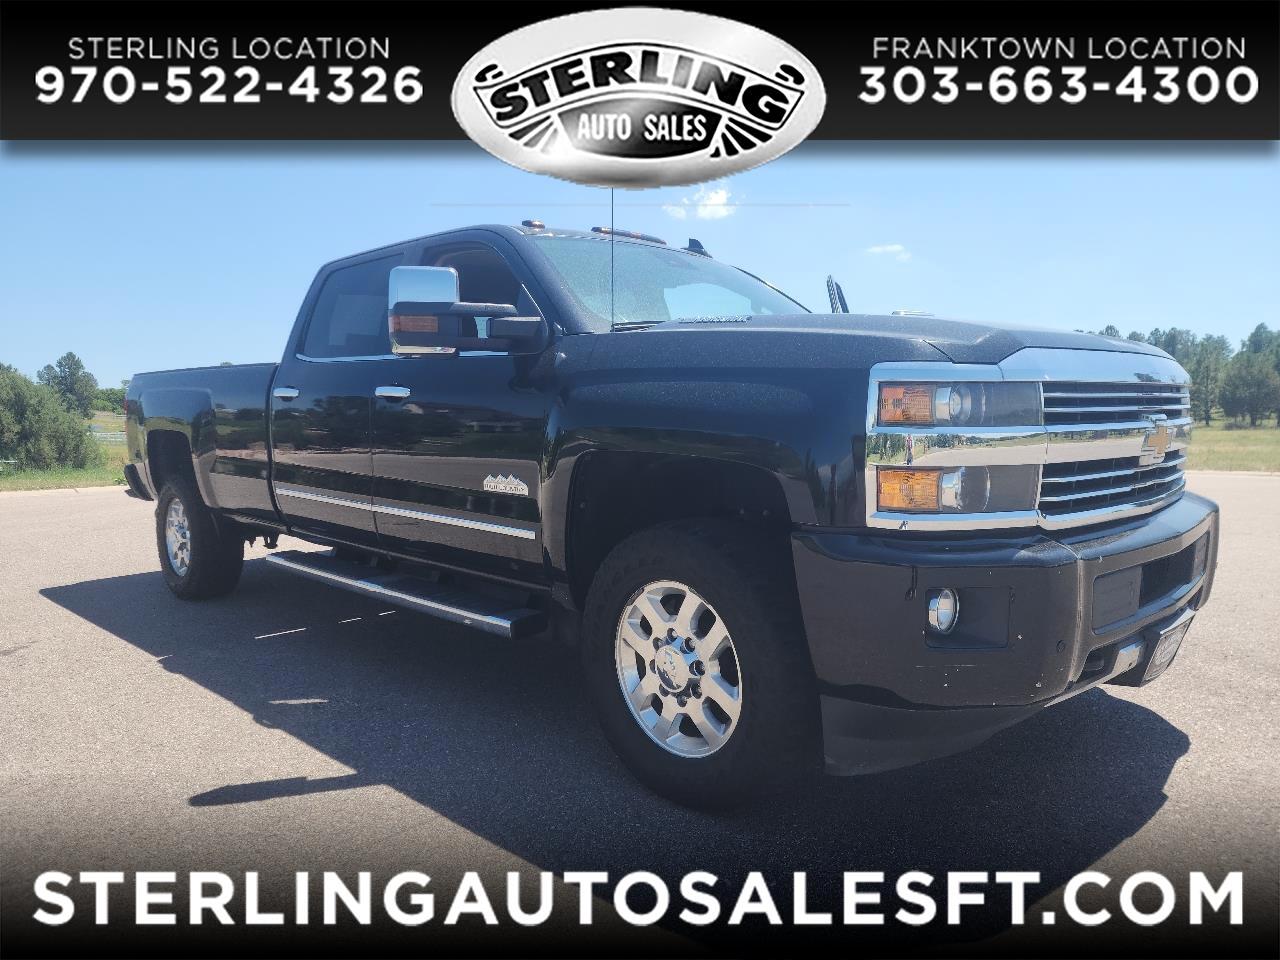 Chevrolet Silverado 3500HD Built After Aug 14 4WD Crew Cab 167.7" High Country 2015